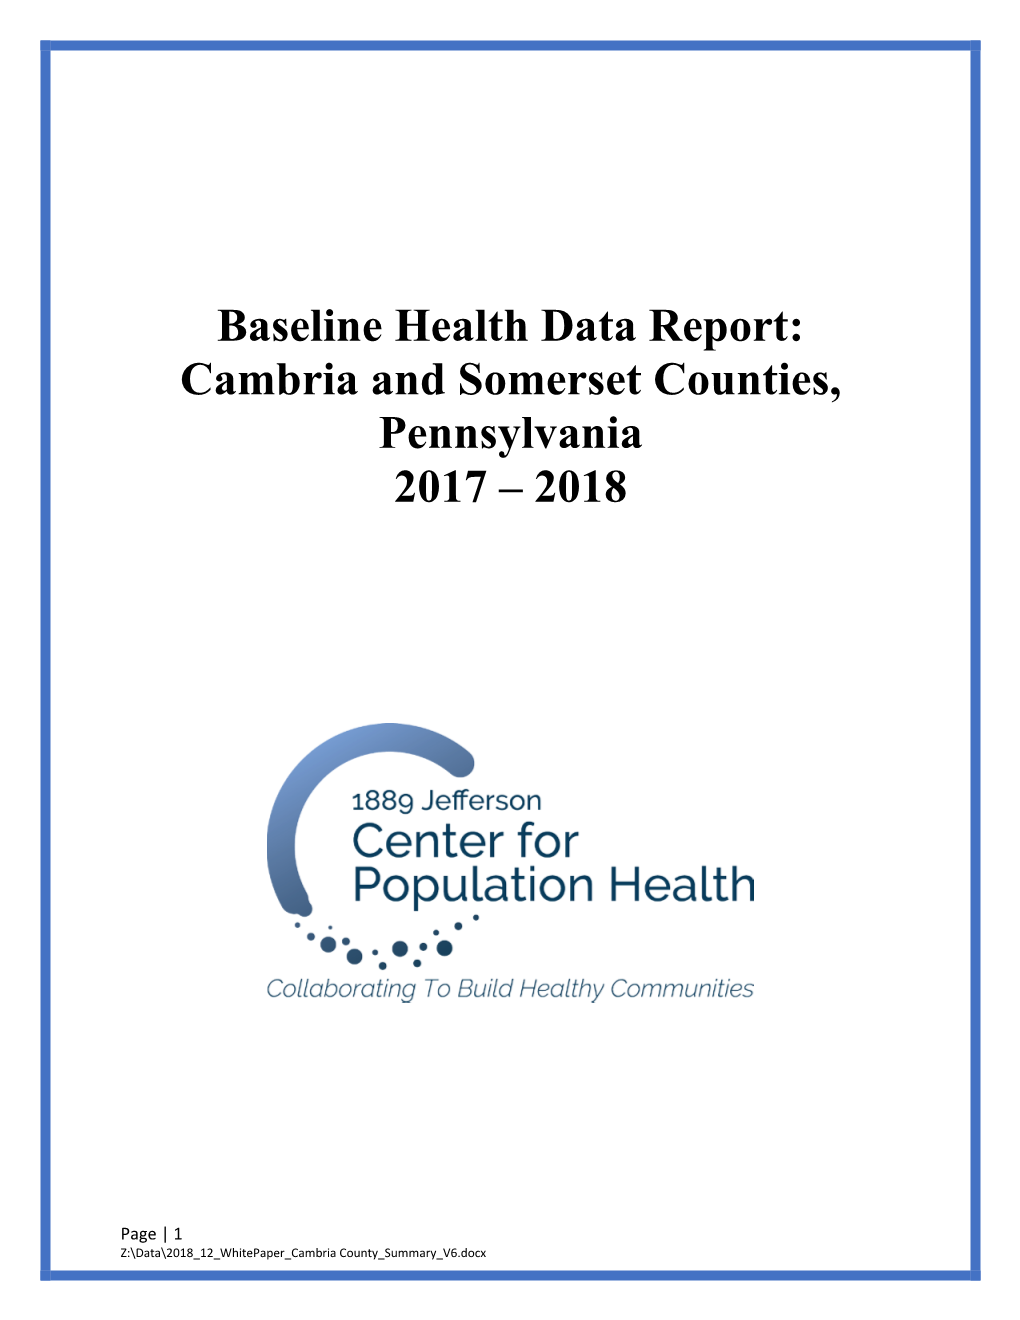 Baseline Health Data Report: Cambria and Somerset Counties, Pennsylvania 2017 – 2018